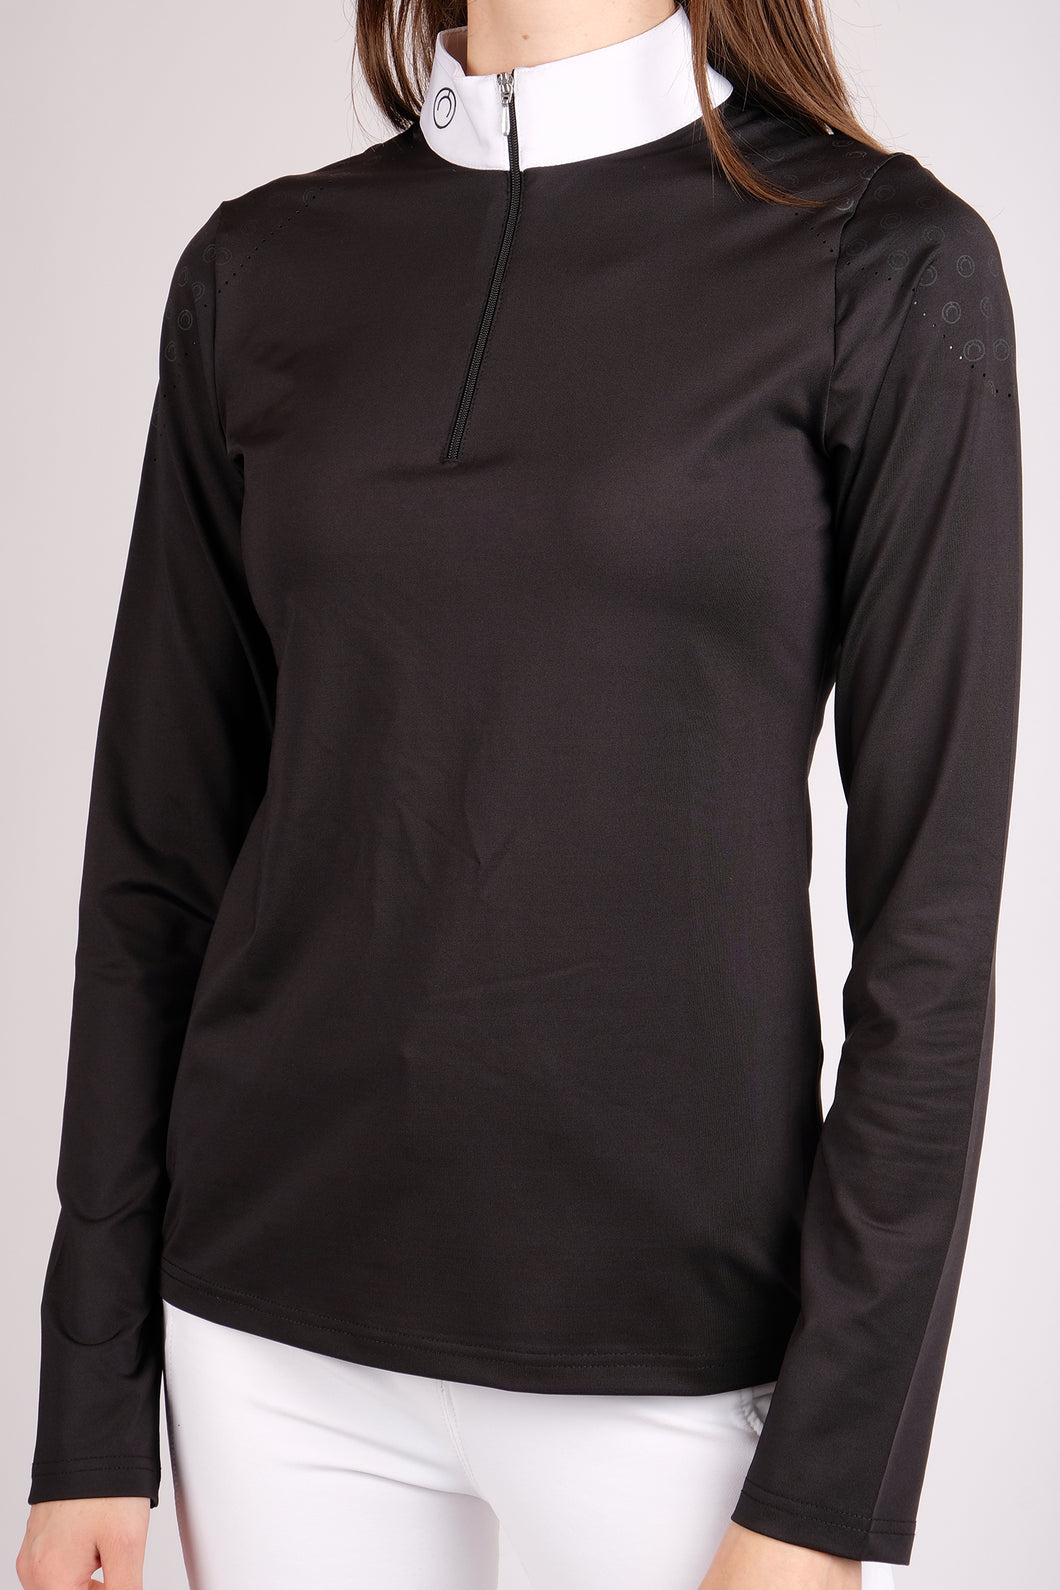 Rosy Longsleeve Competition Shirt - Black